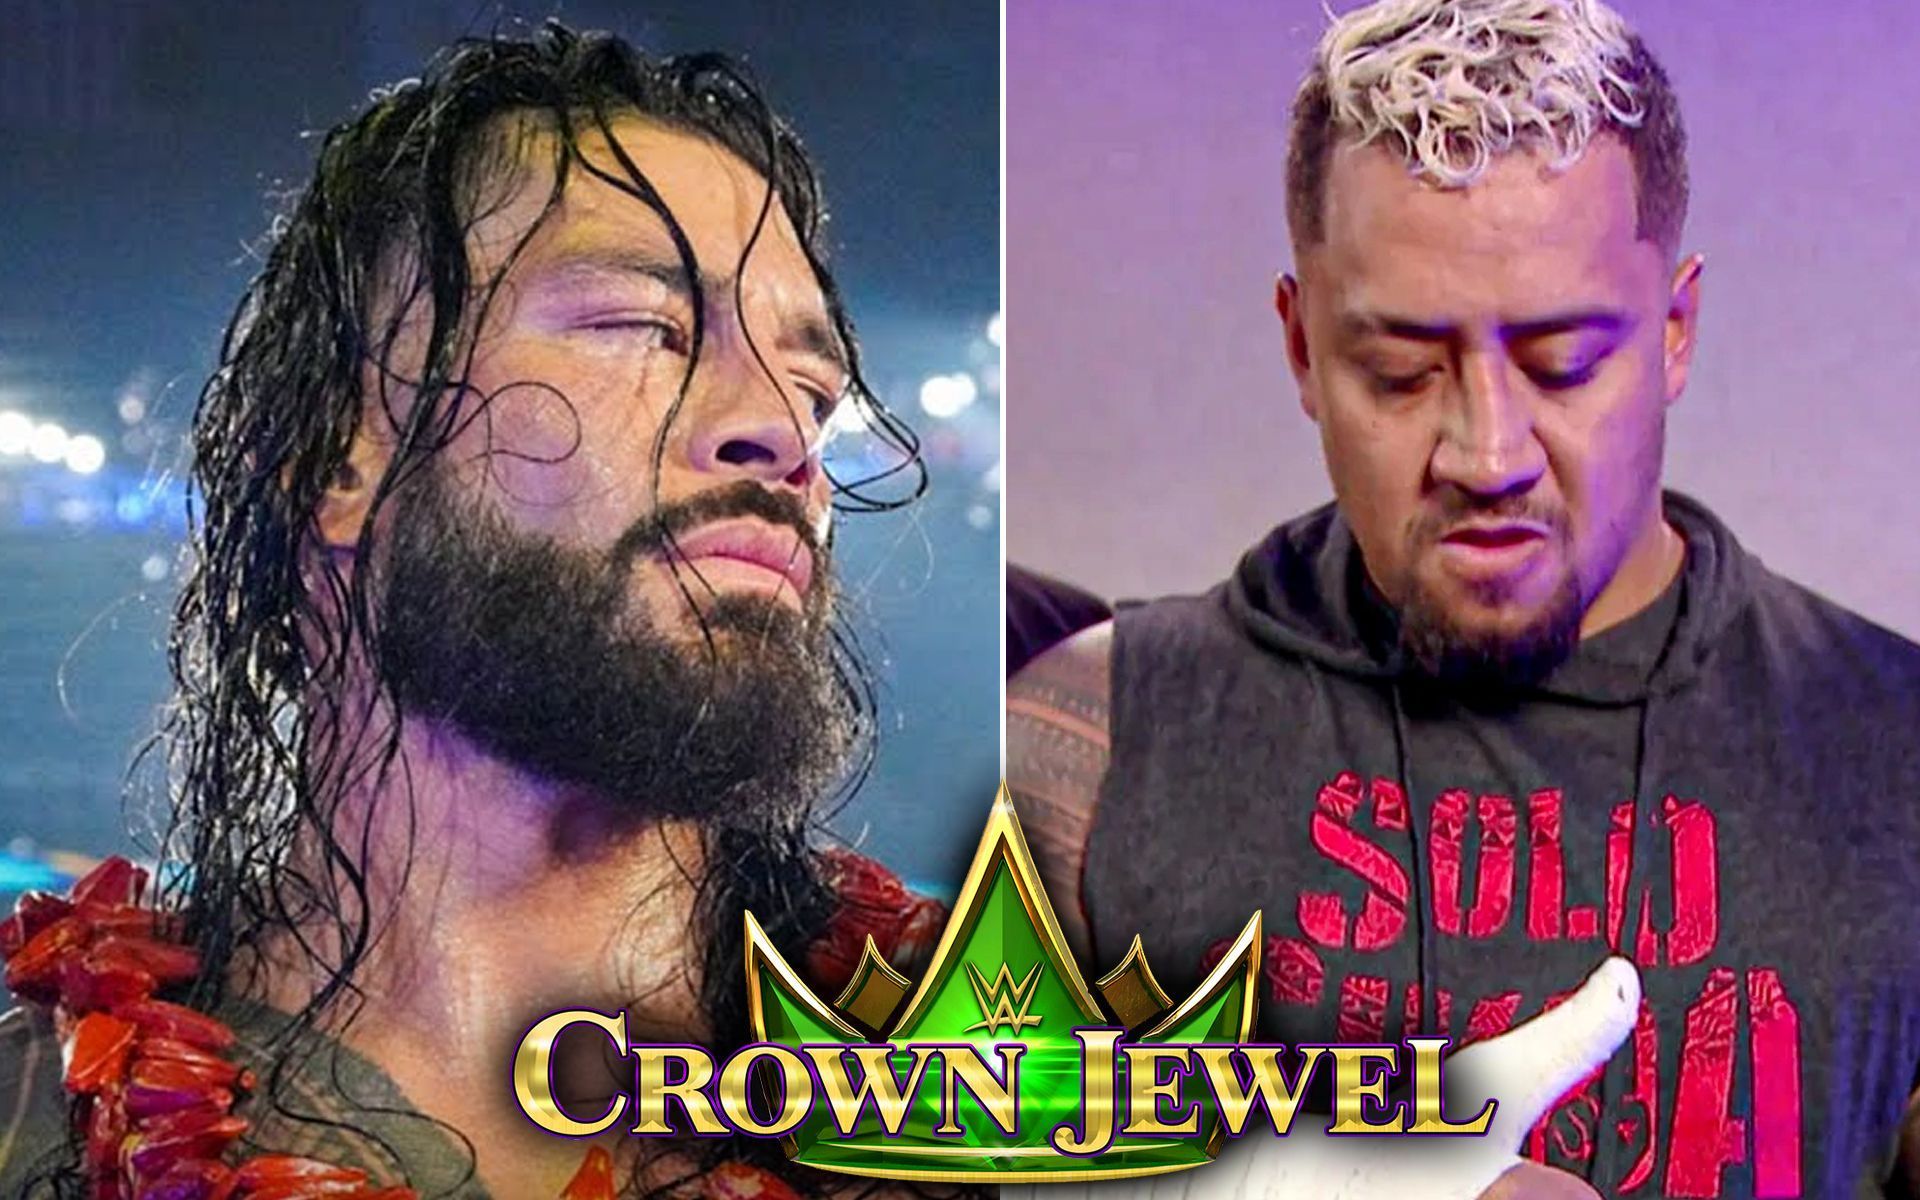 WWE Crown Jewel 2023 is the next Premium Live event of WWE